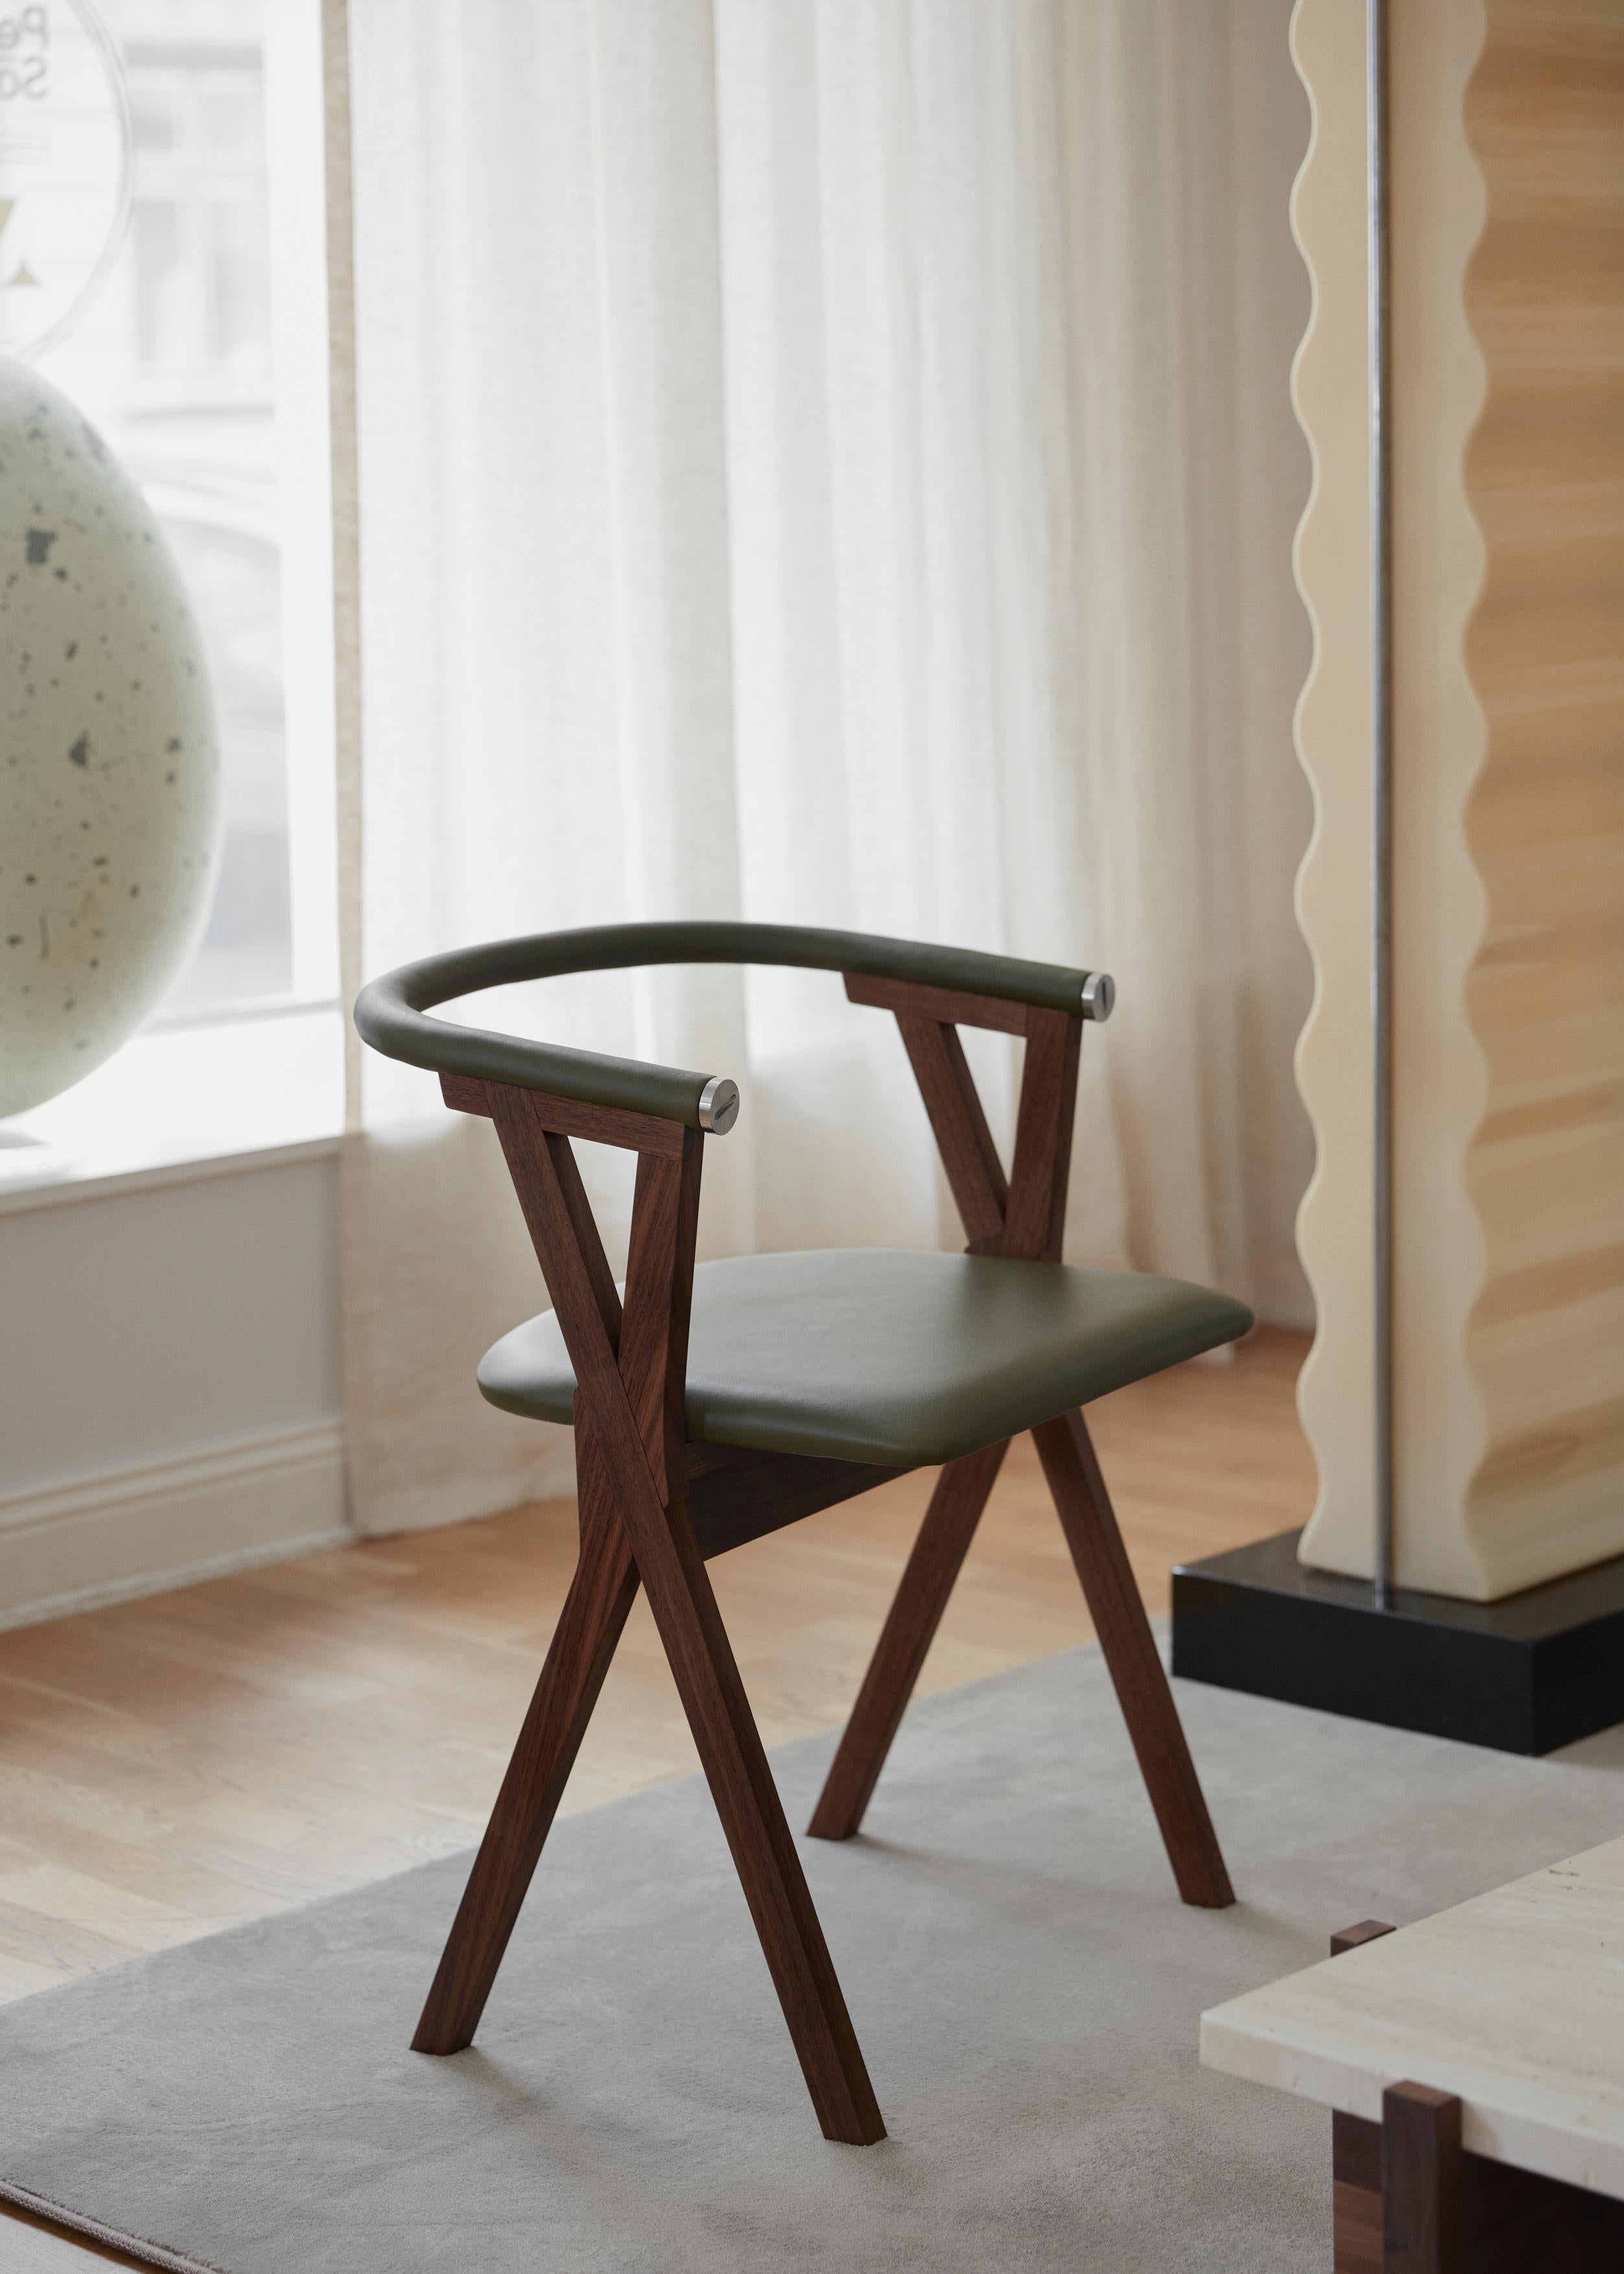 This contemporary Scandinavian dining chair is handmade in Sweden using the finest materials such as massive American walnut, Swedish vegetable tanned leather and details in stainless steel. Designed by Per Soderberg in 2020 for No Early Birds / PS